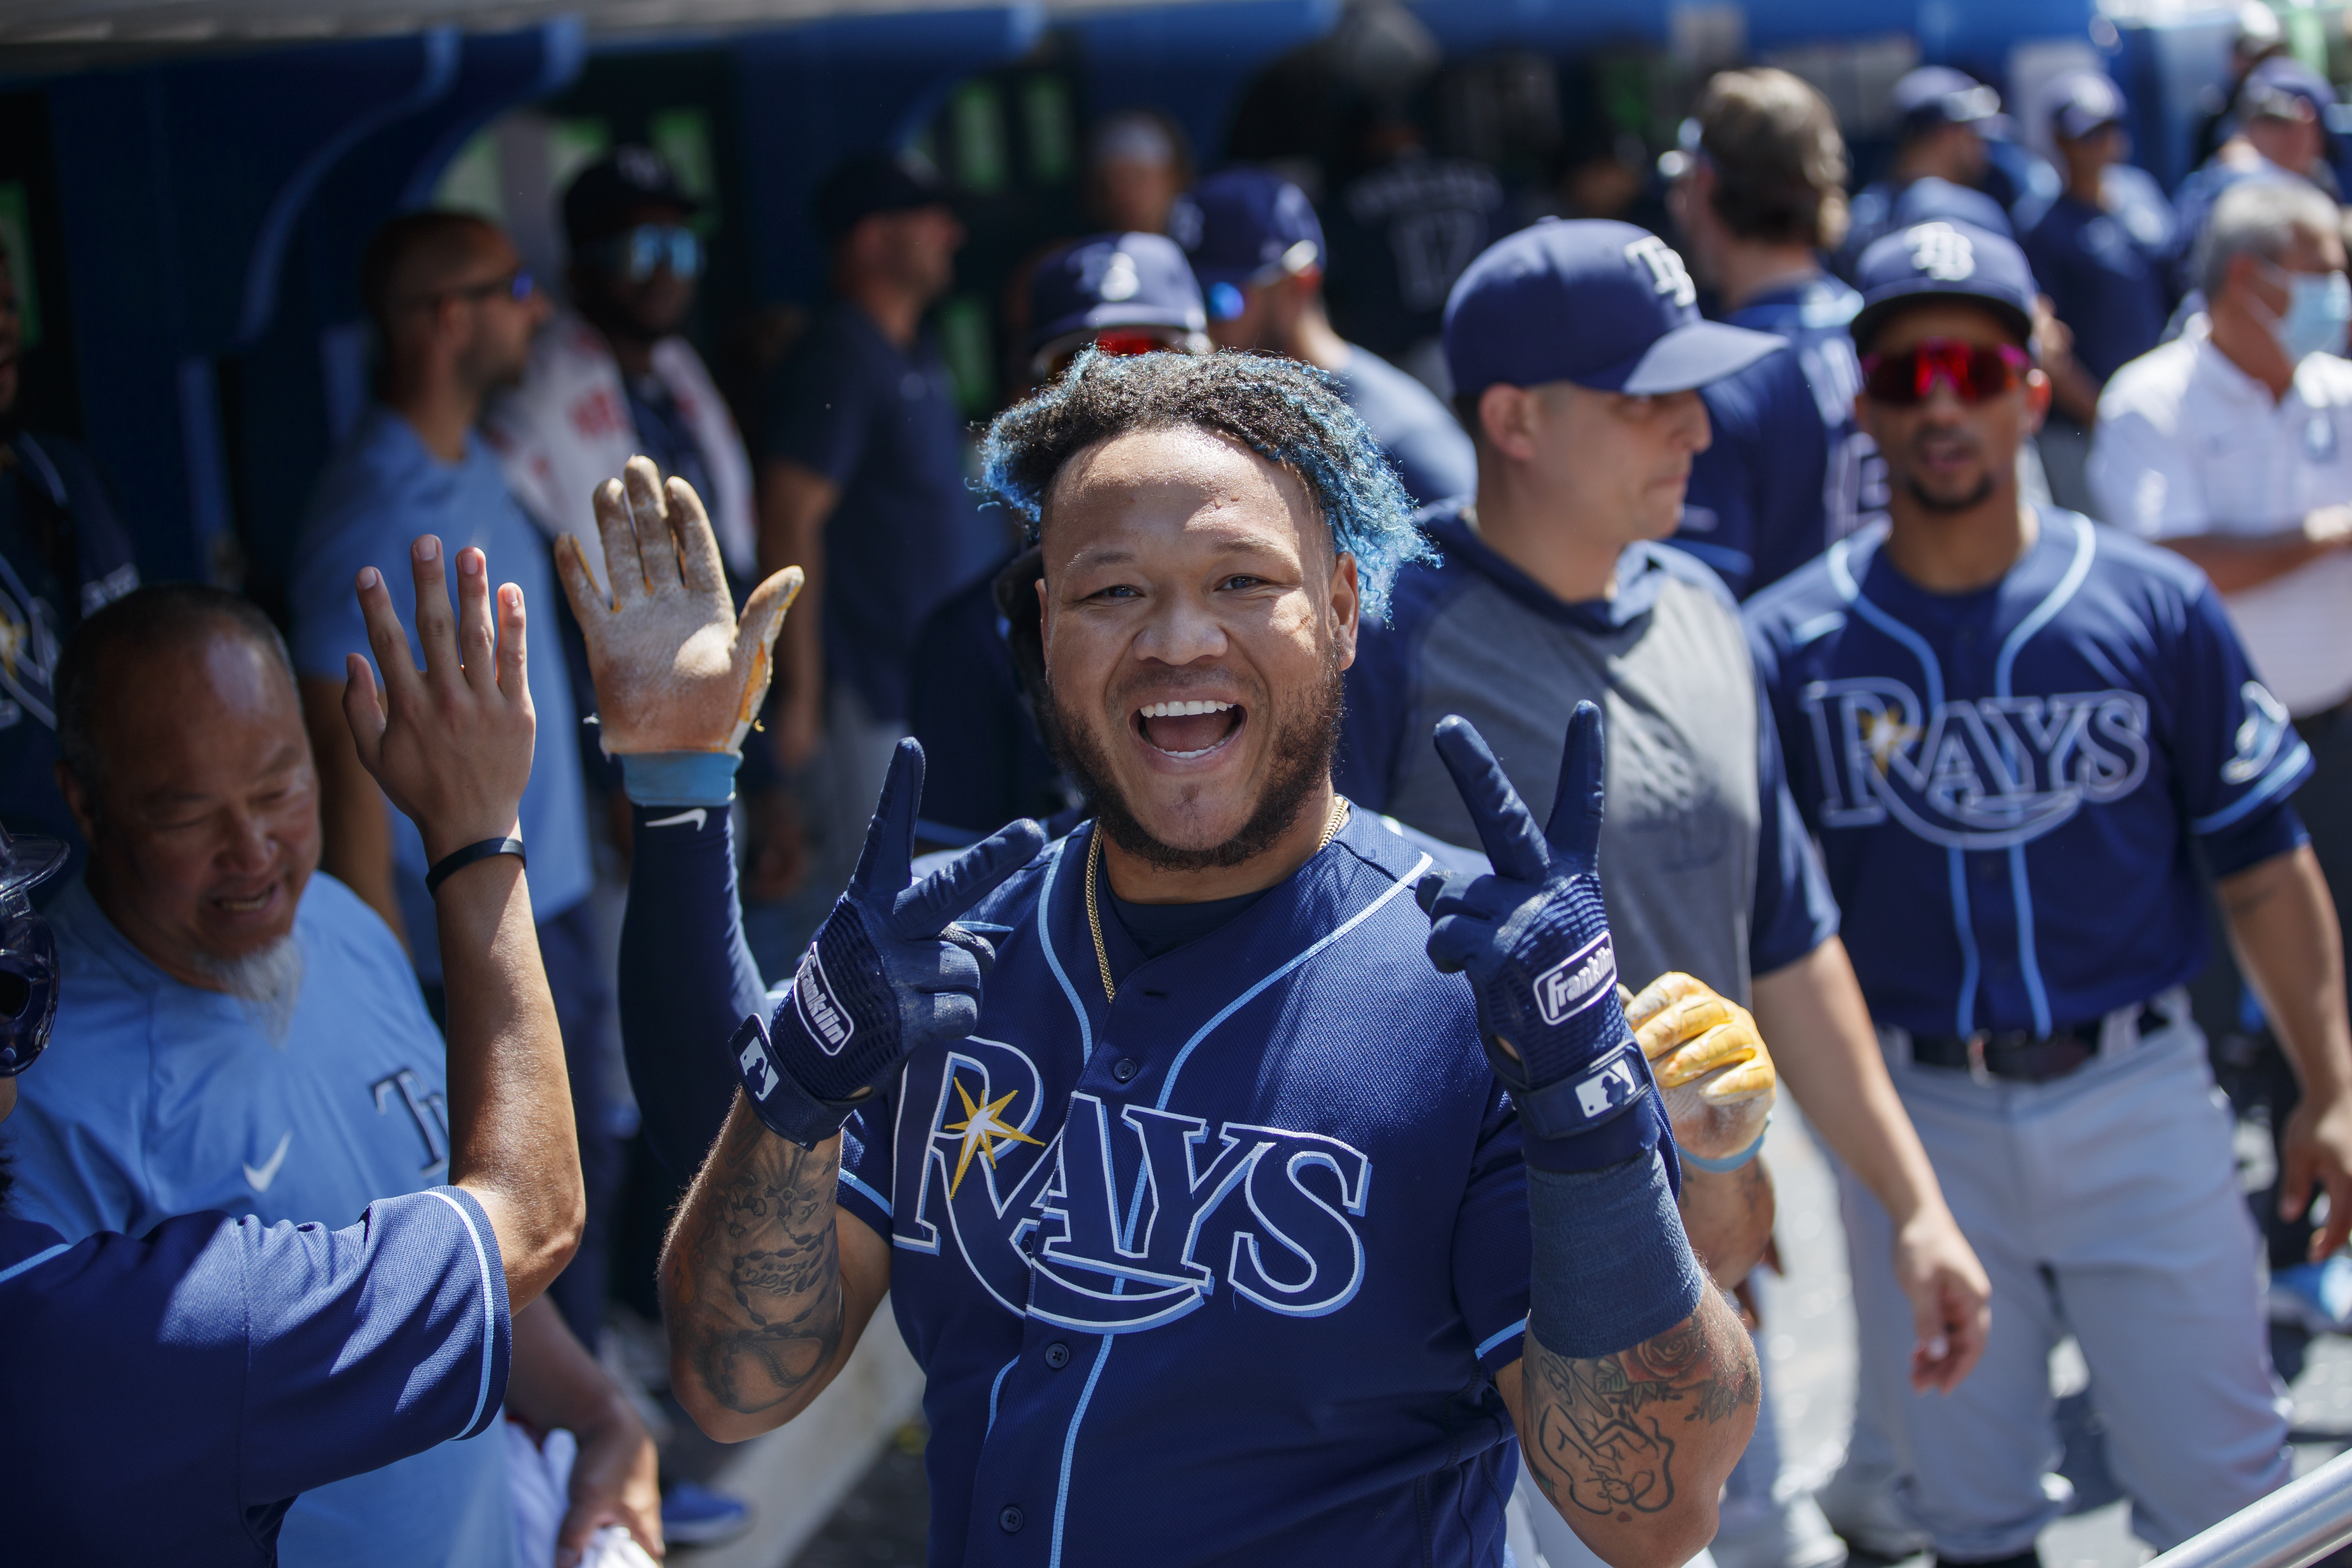 Randy Arozarena delivers for fans as Rays hold off Blue Jays